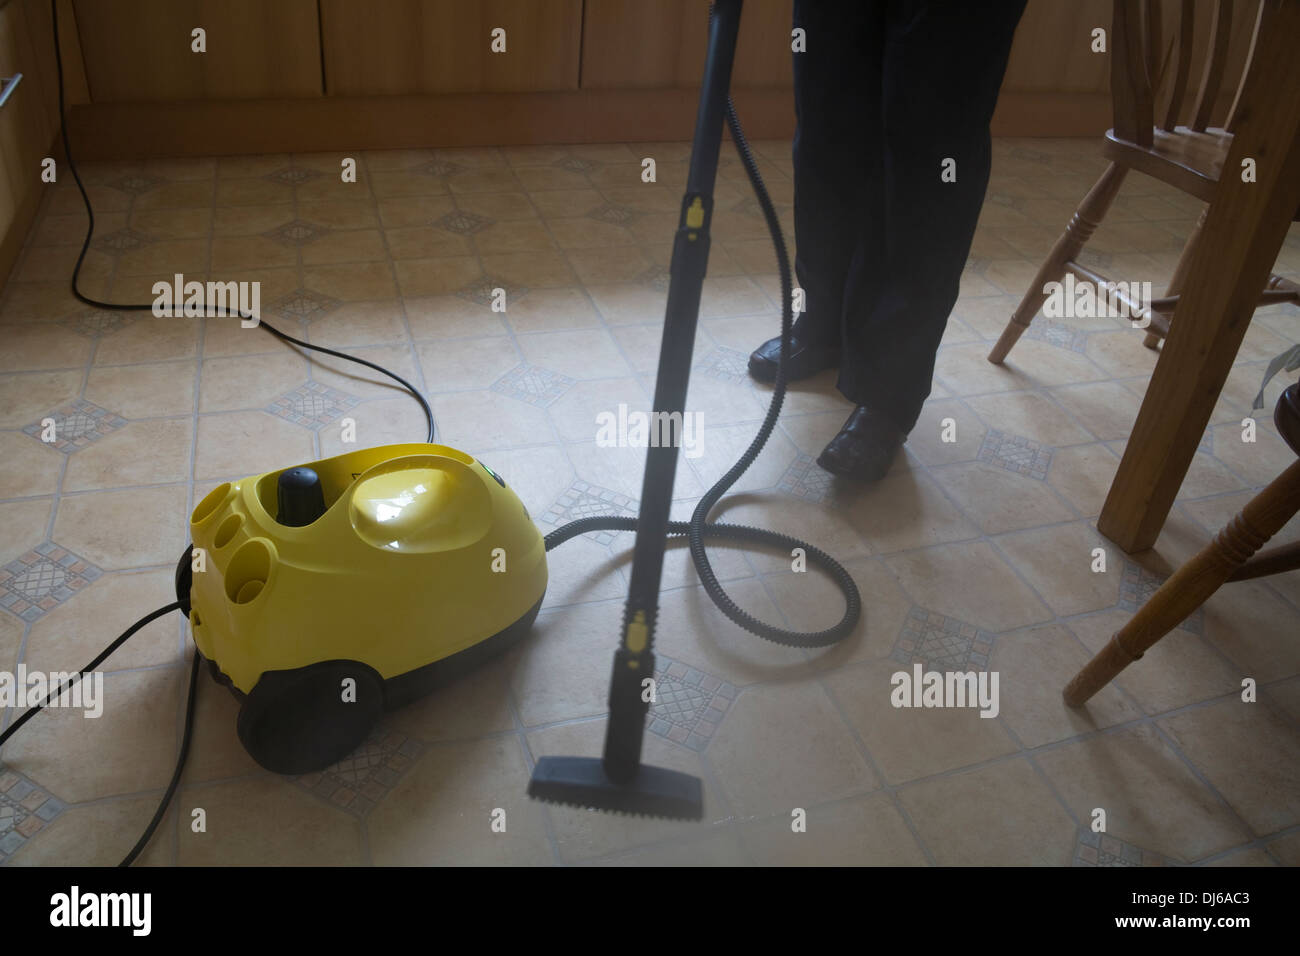 how to descale a steam mop?